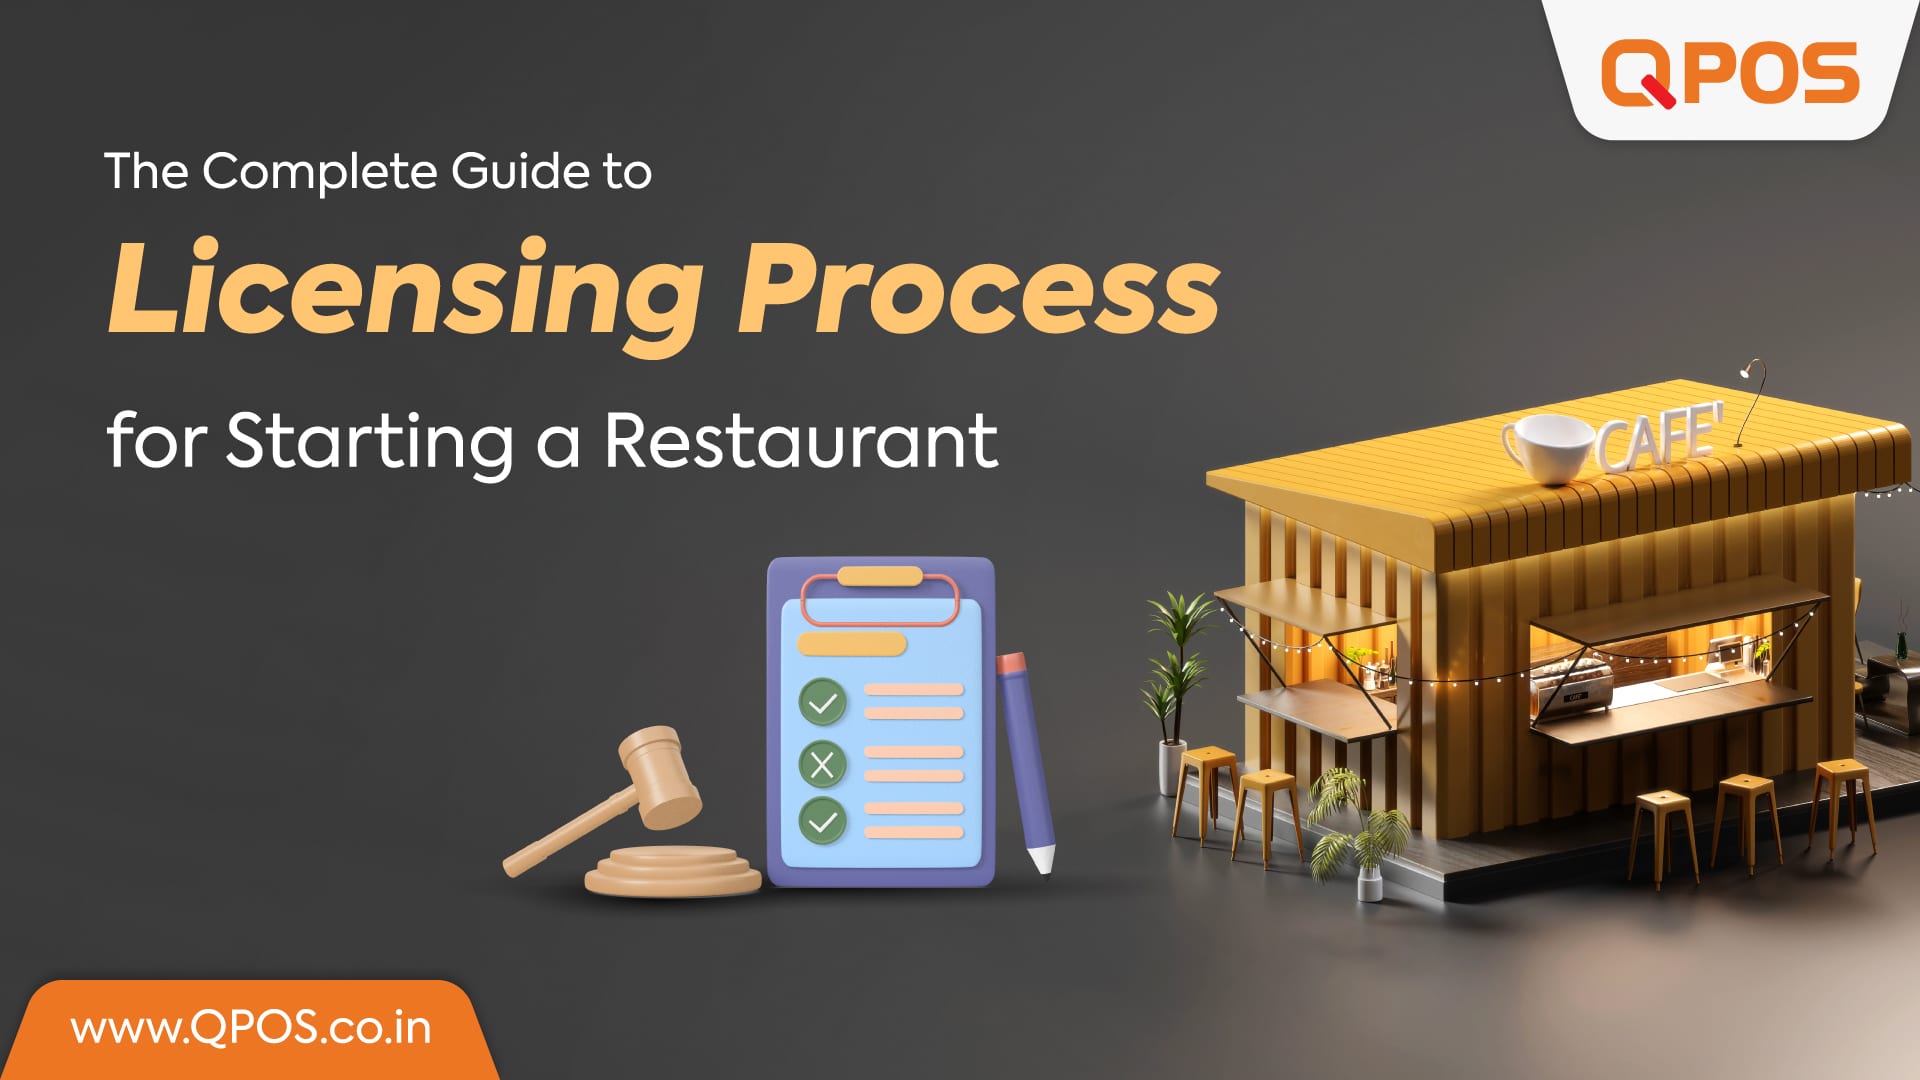 The Complete Guide to Licensing Process for Starting a Restaurant